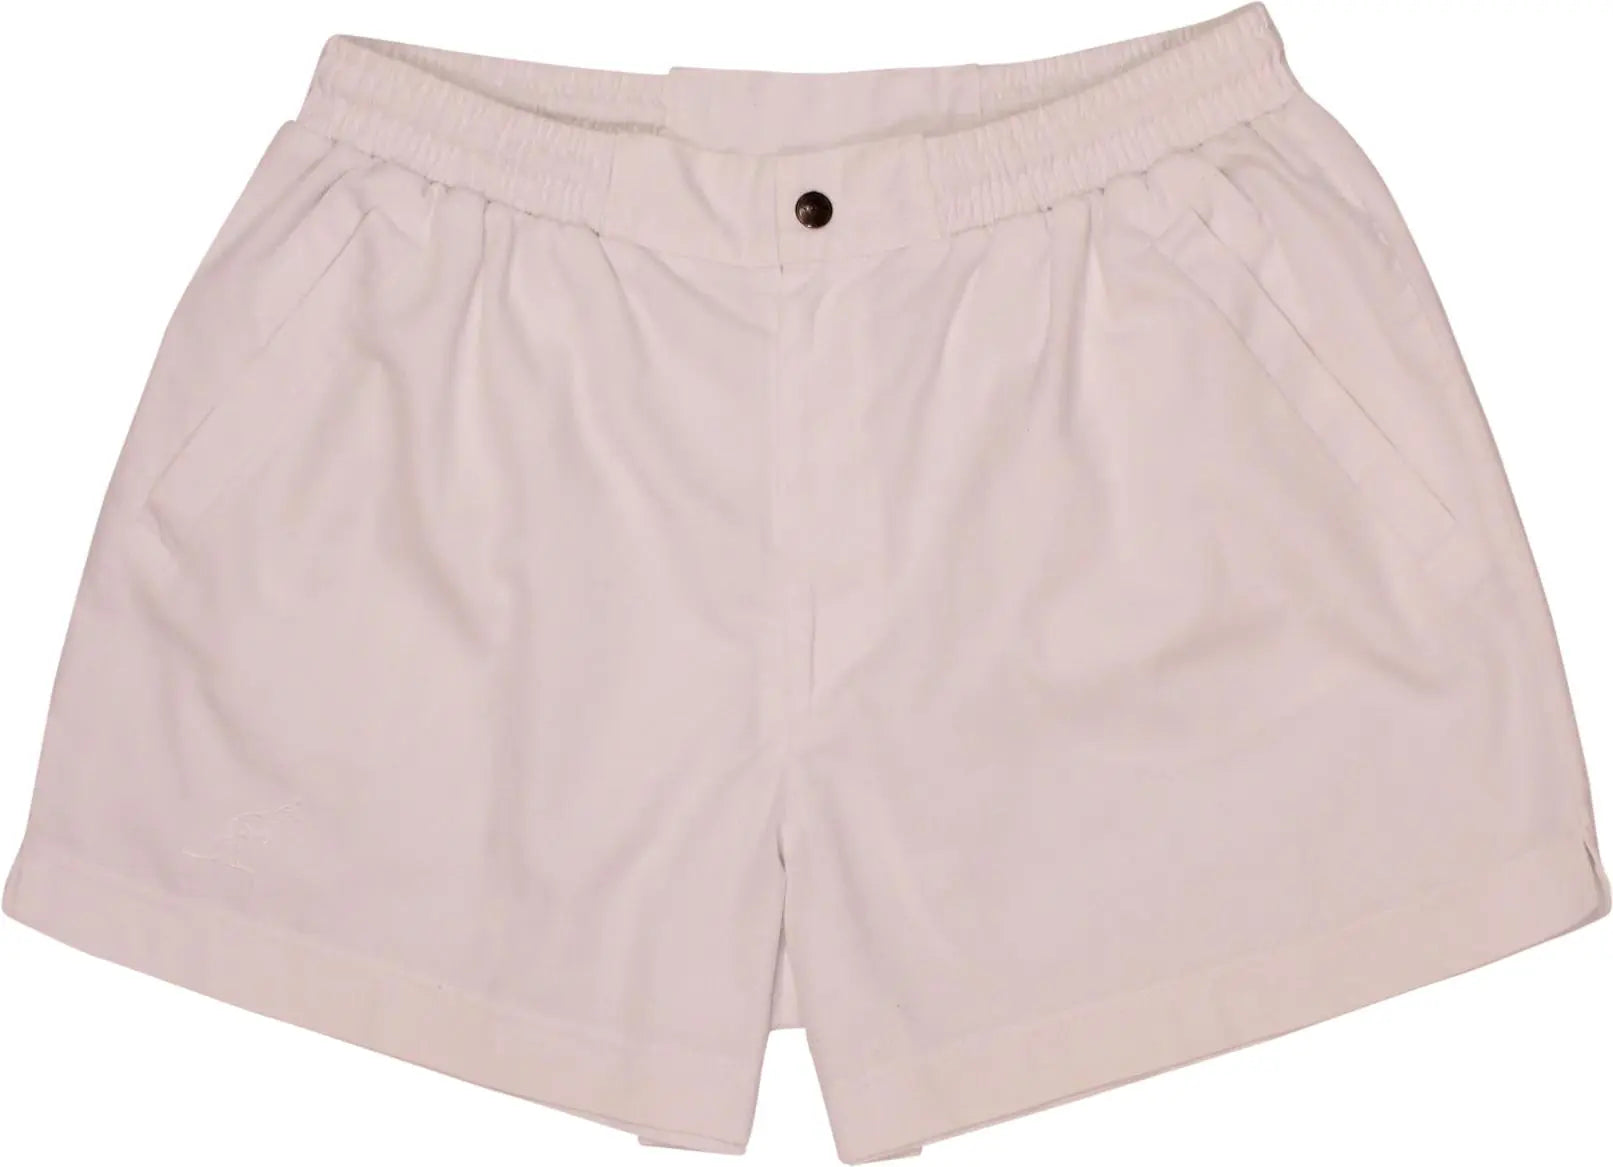 Australian L'alpina - White Tennis Shorts by Australian L'alpina- ThriftTale.com - Vintage and second handclothing